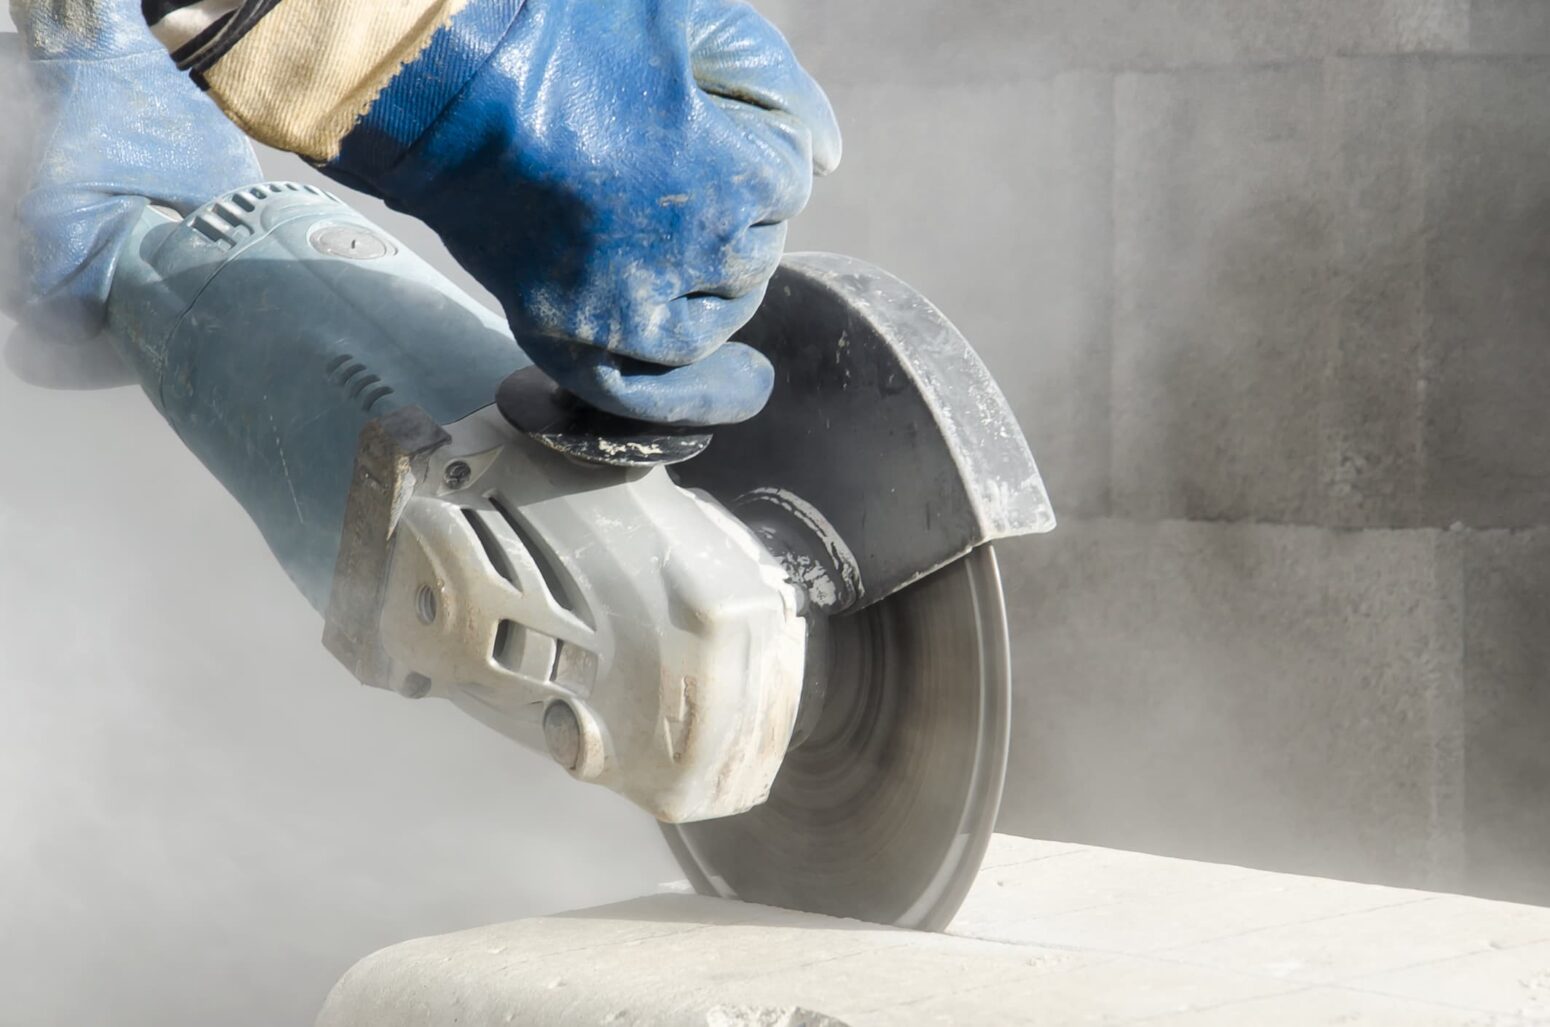 Easier and faster access to WorkCover Entitlements for those workers exposed to Silica